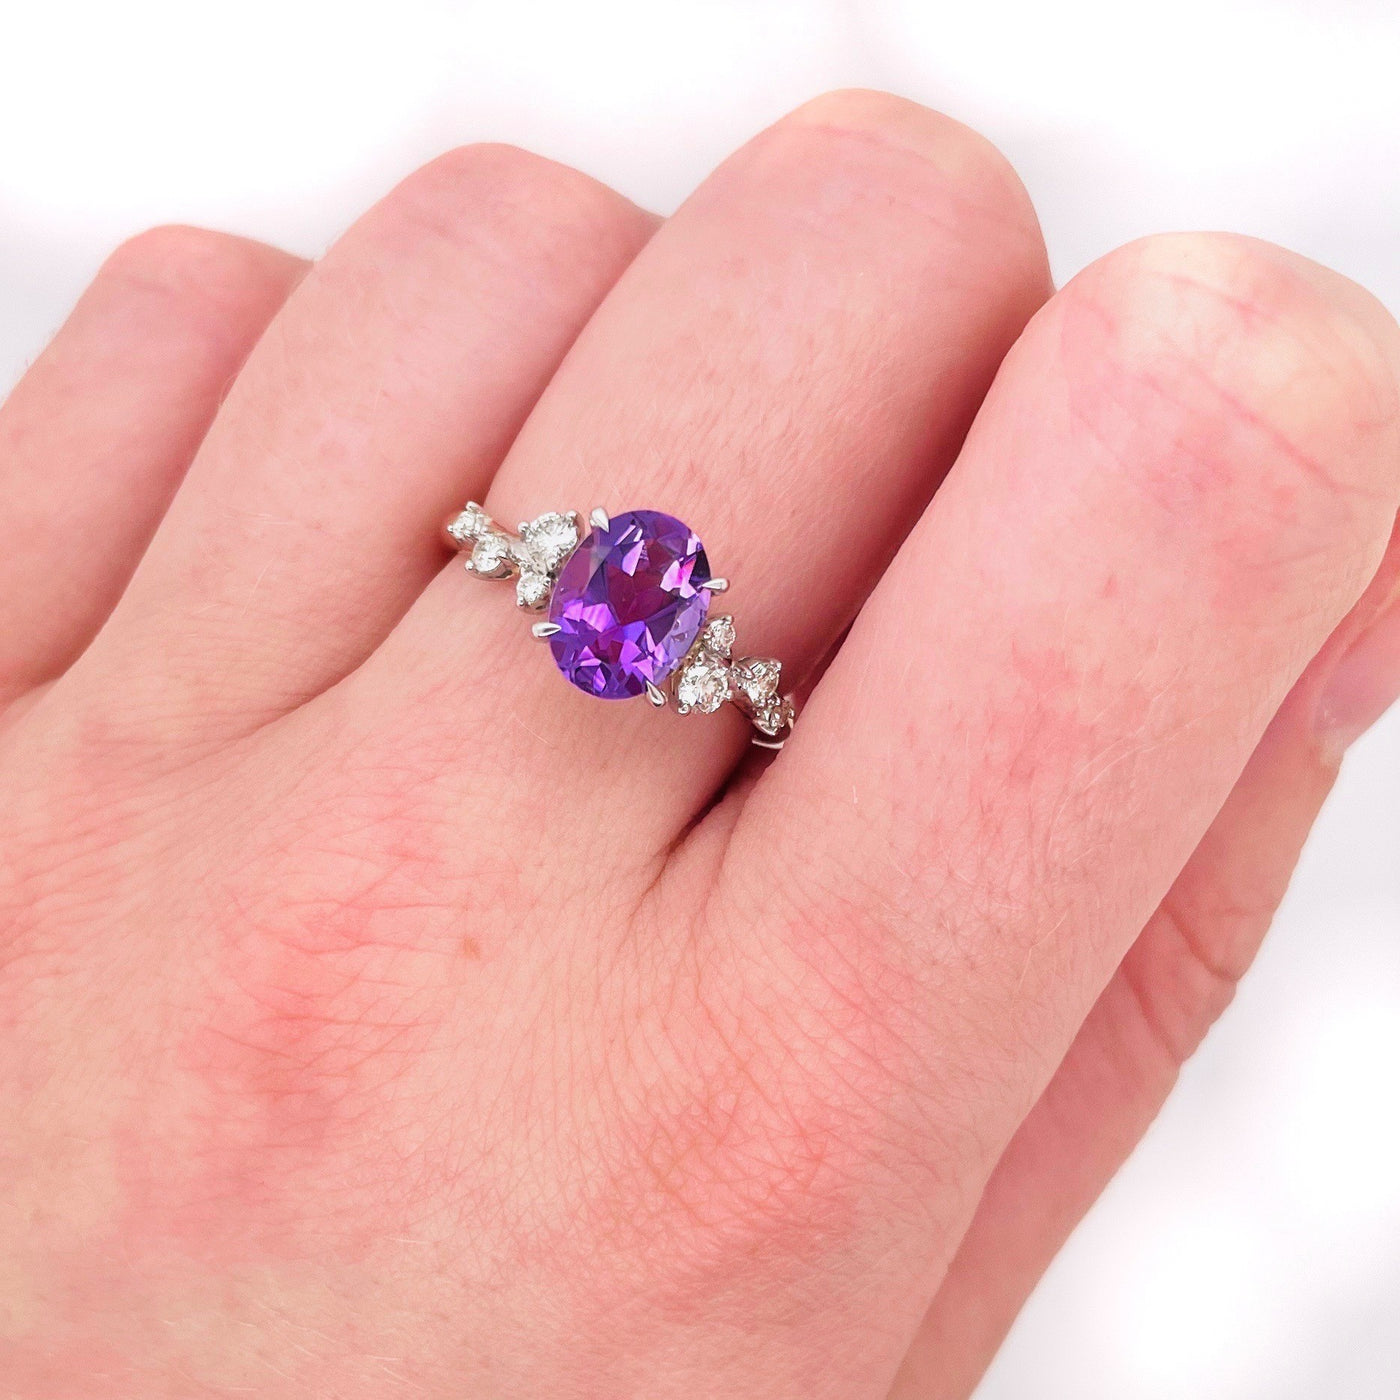 9ct Rose Gold Amethyst and Diamond Ring